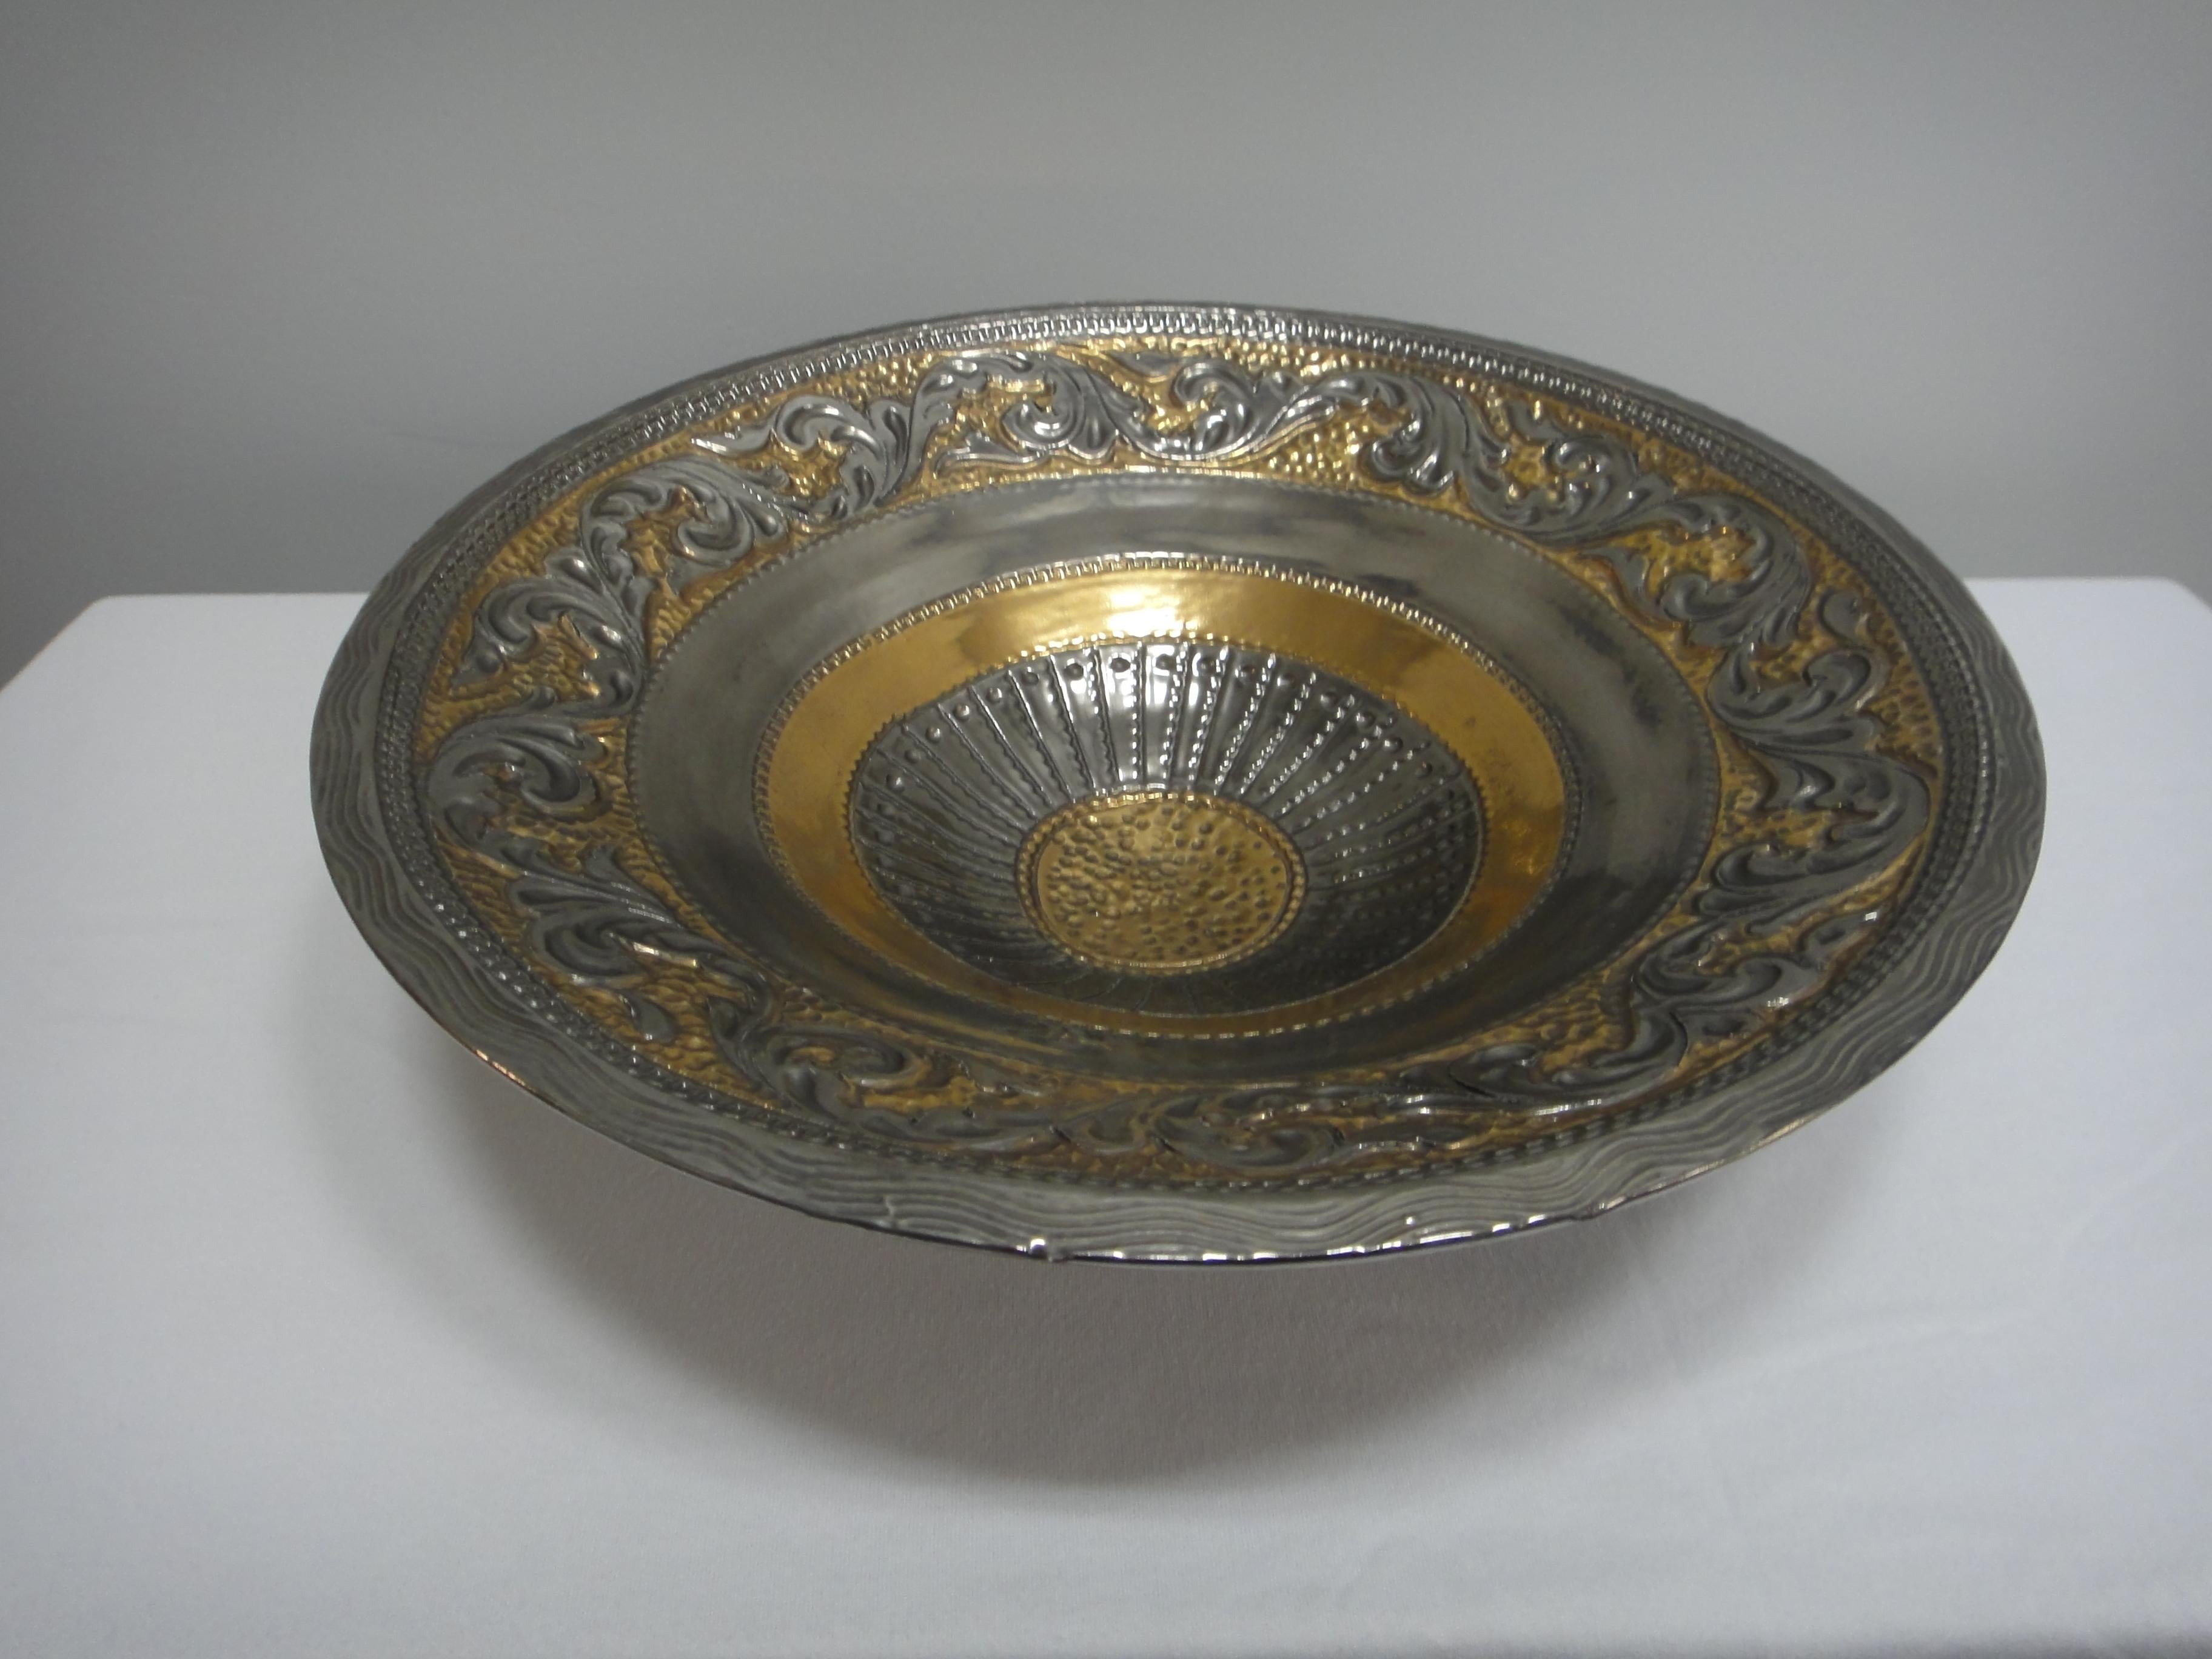 Marioni Neoclassical Style Ceramic Centerpiece Bowl, Italy In Excellent Condition For Sale In Miami, FL